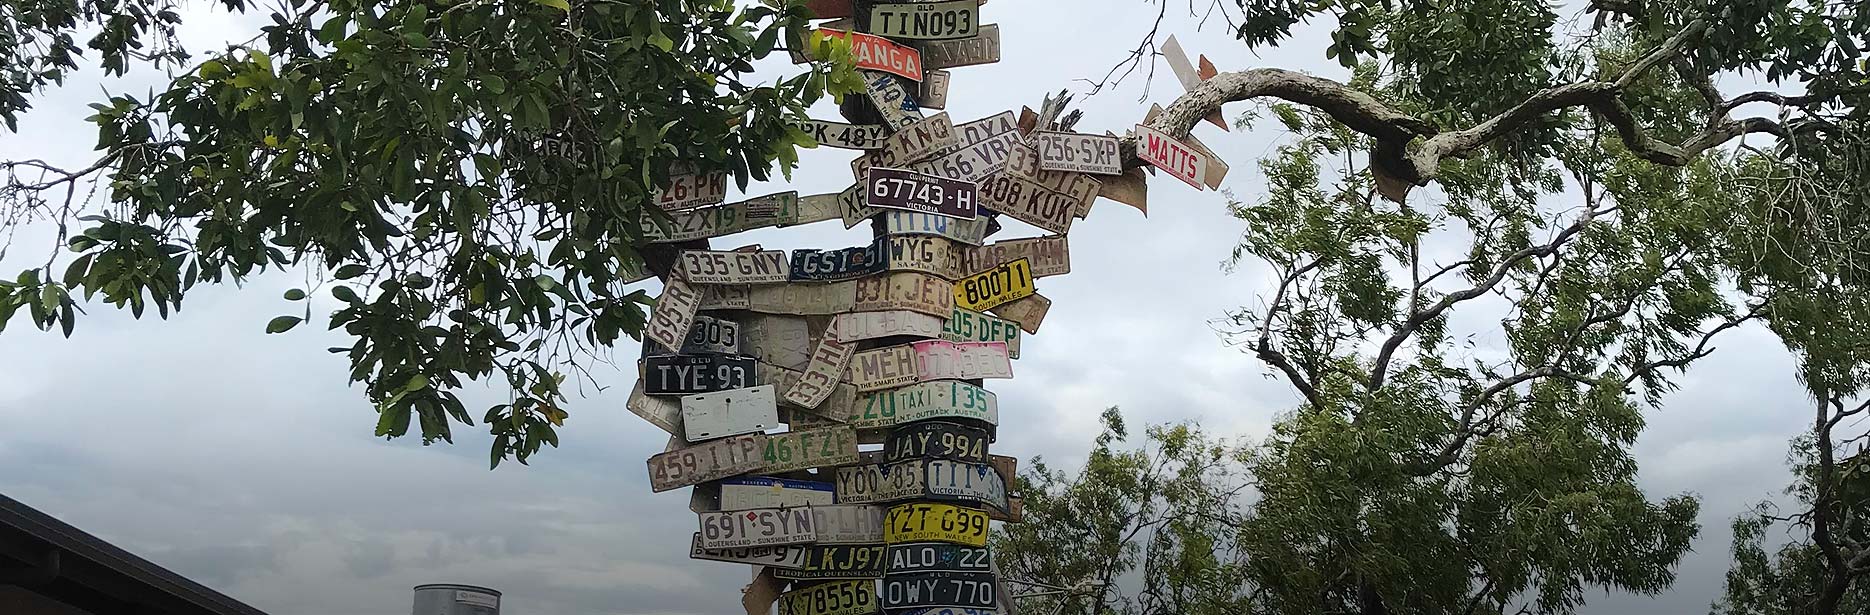 The number plate tree at Bramwell Station in Cape York